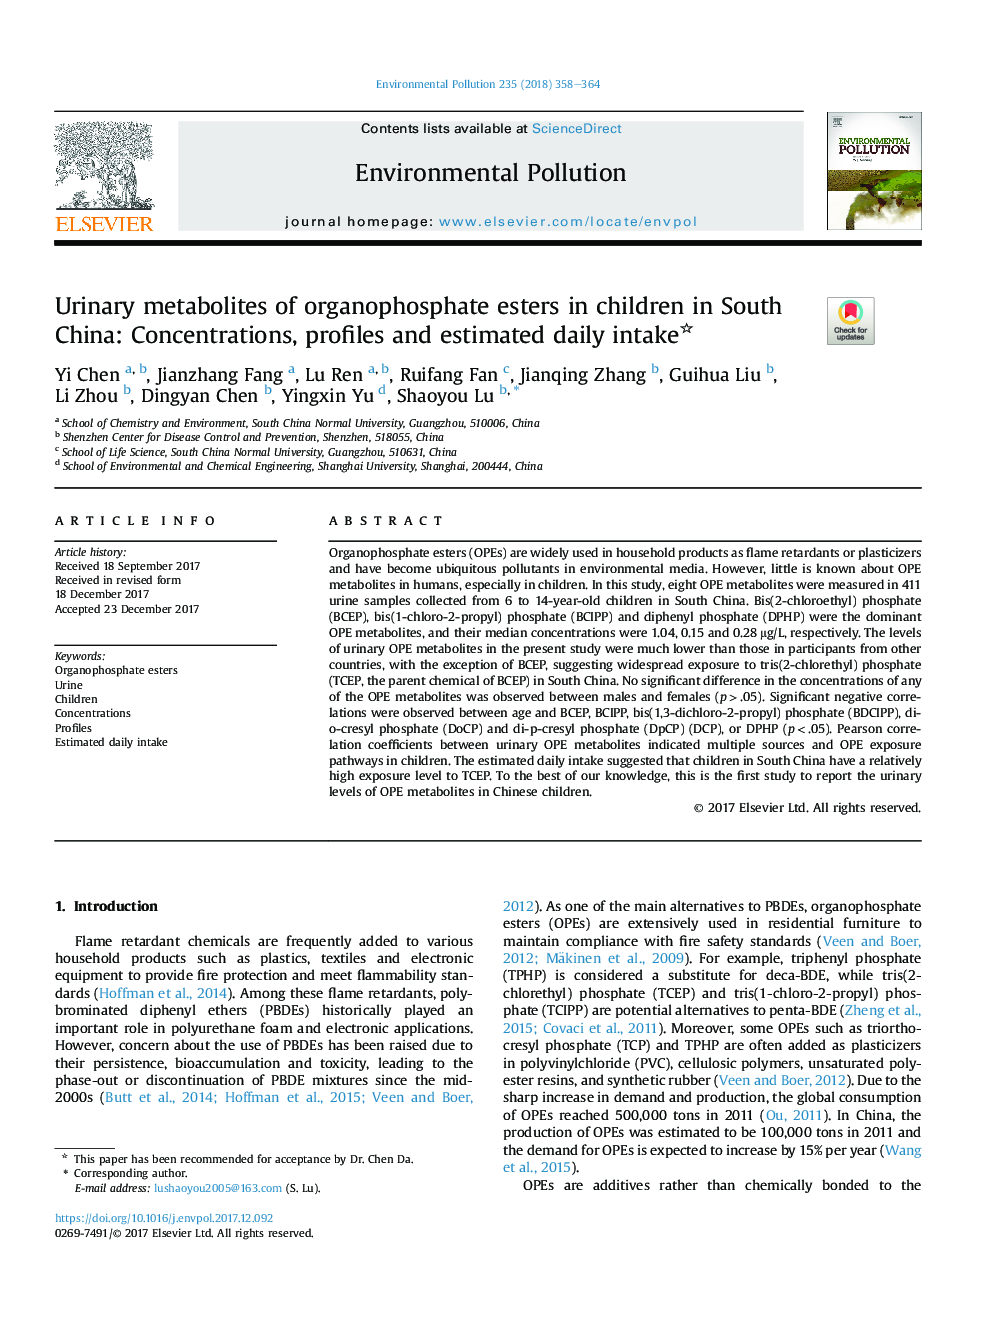 Urinary metabolites of organophosphate esters in children in South China: Concentrations, profiles and estimated daily intake